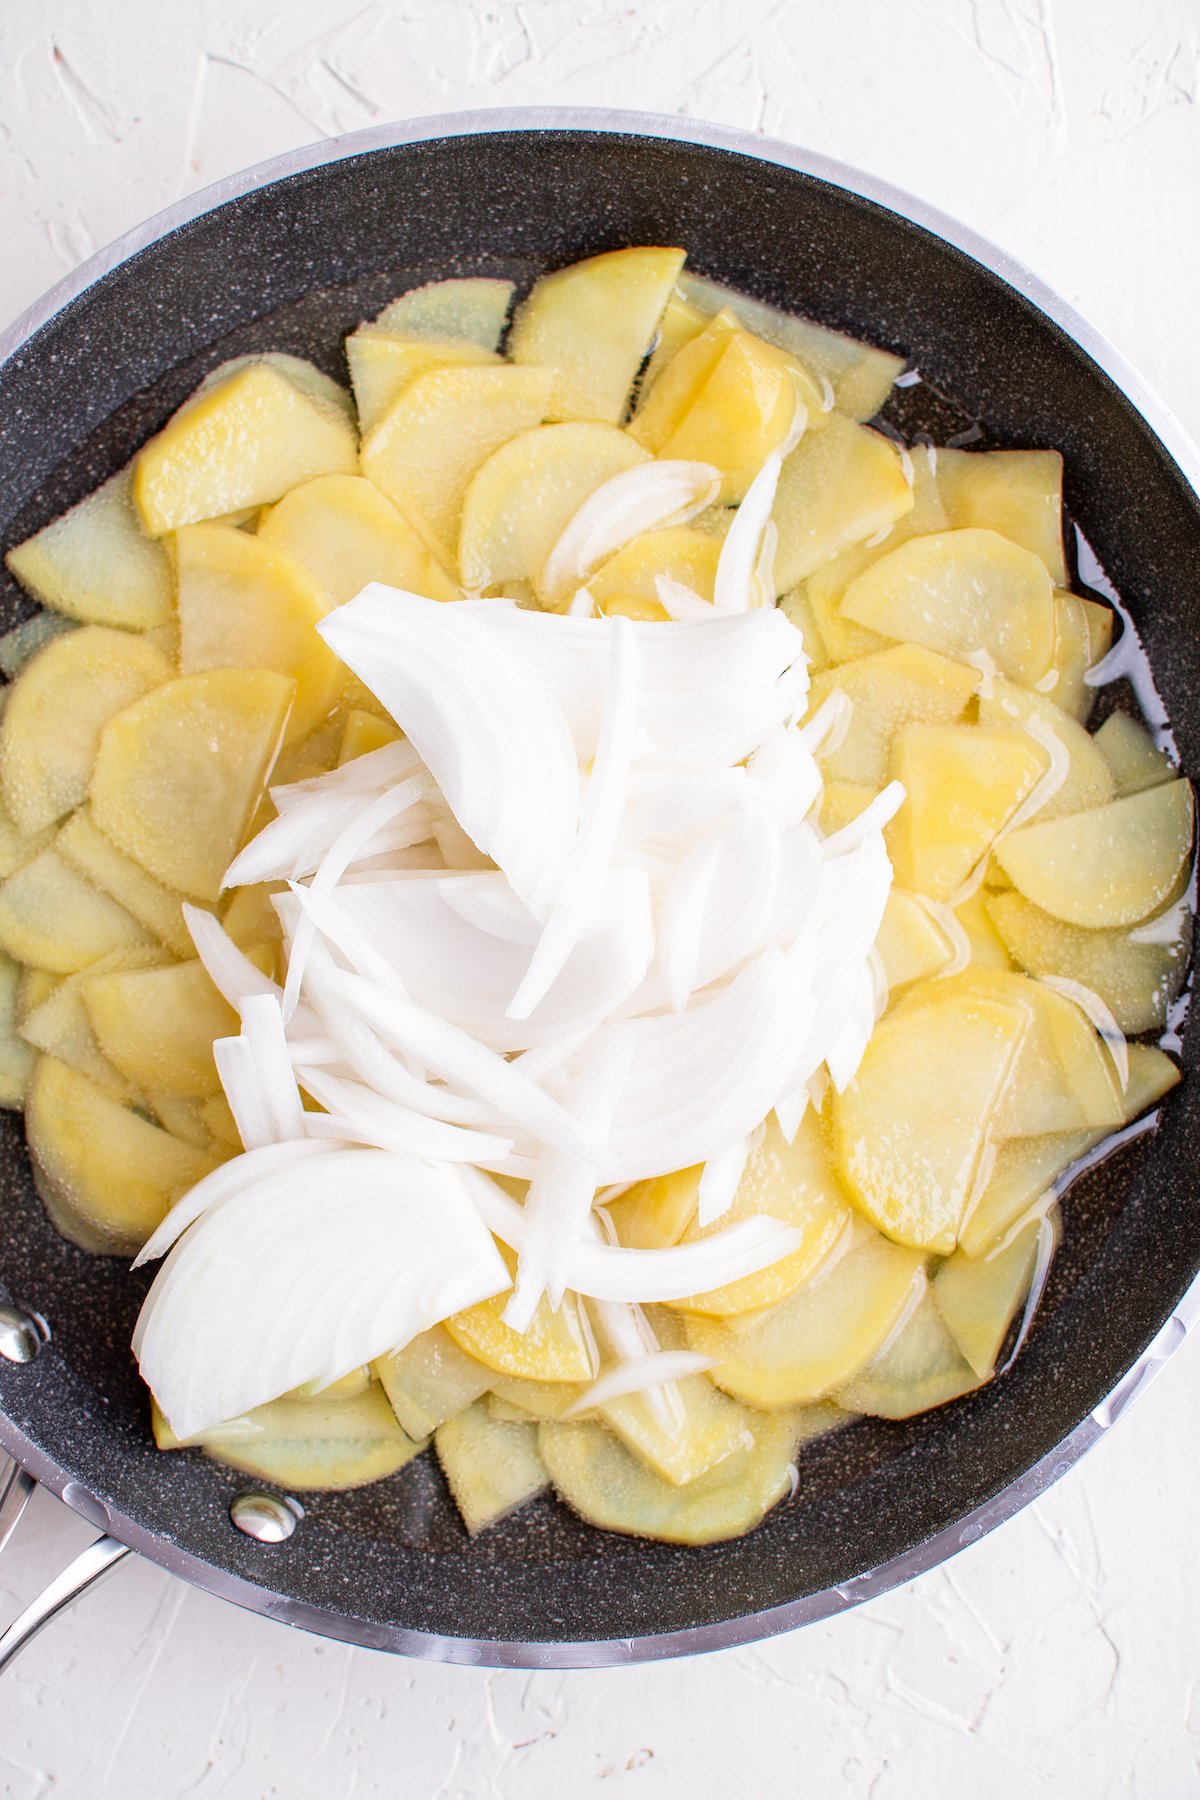 A skillet filled with half-moon slices of potatoes in oil, with slices of white onion piled on top